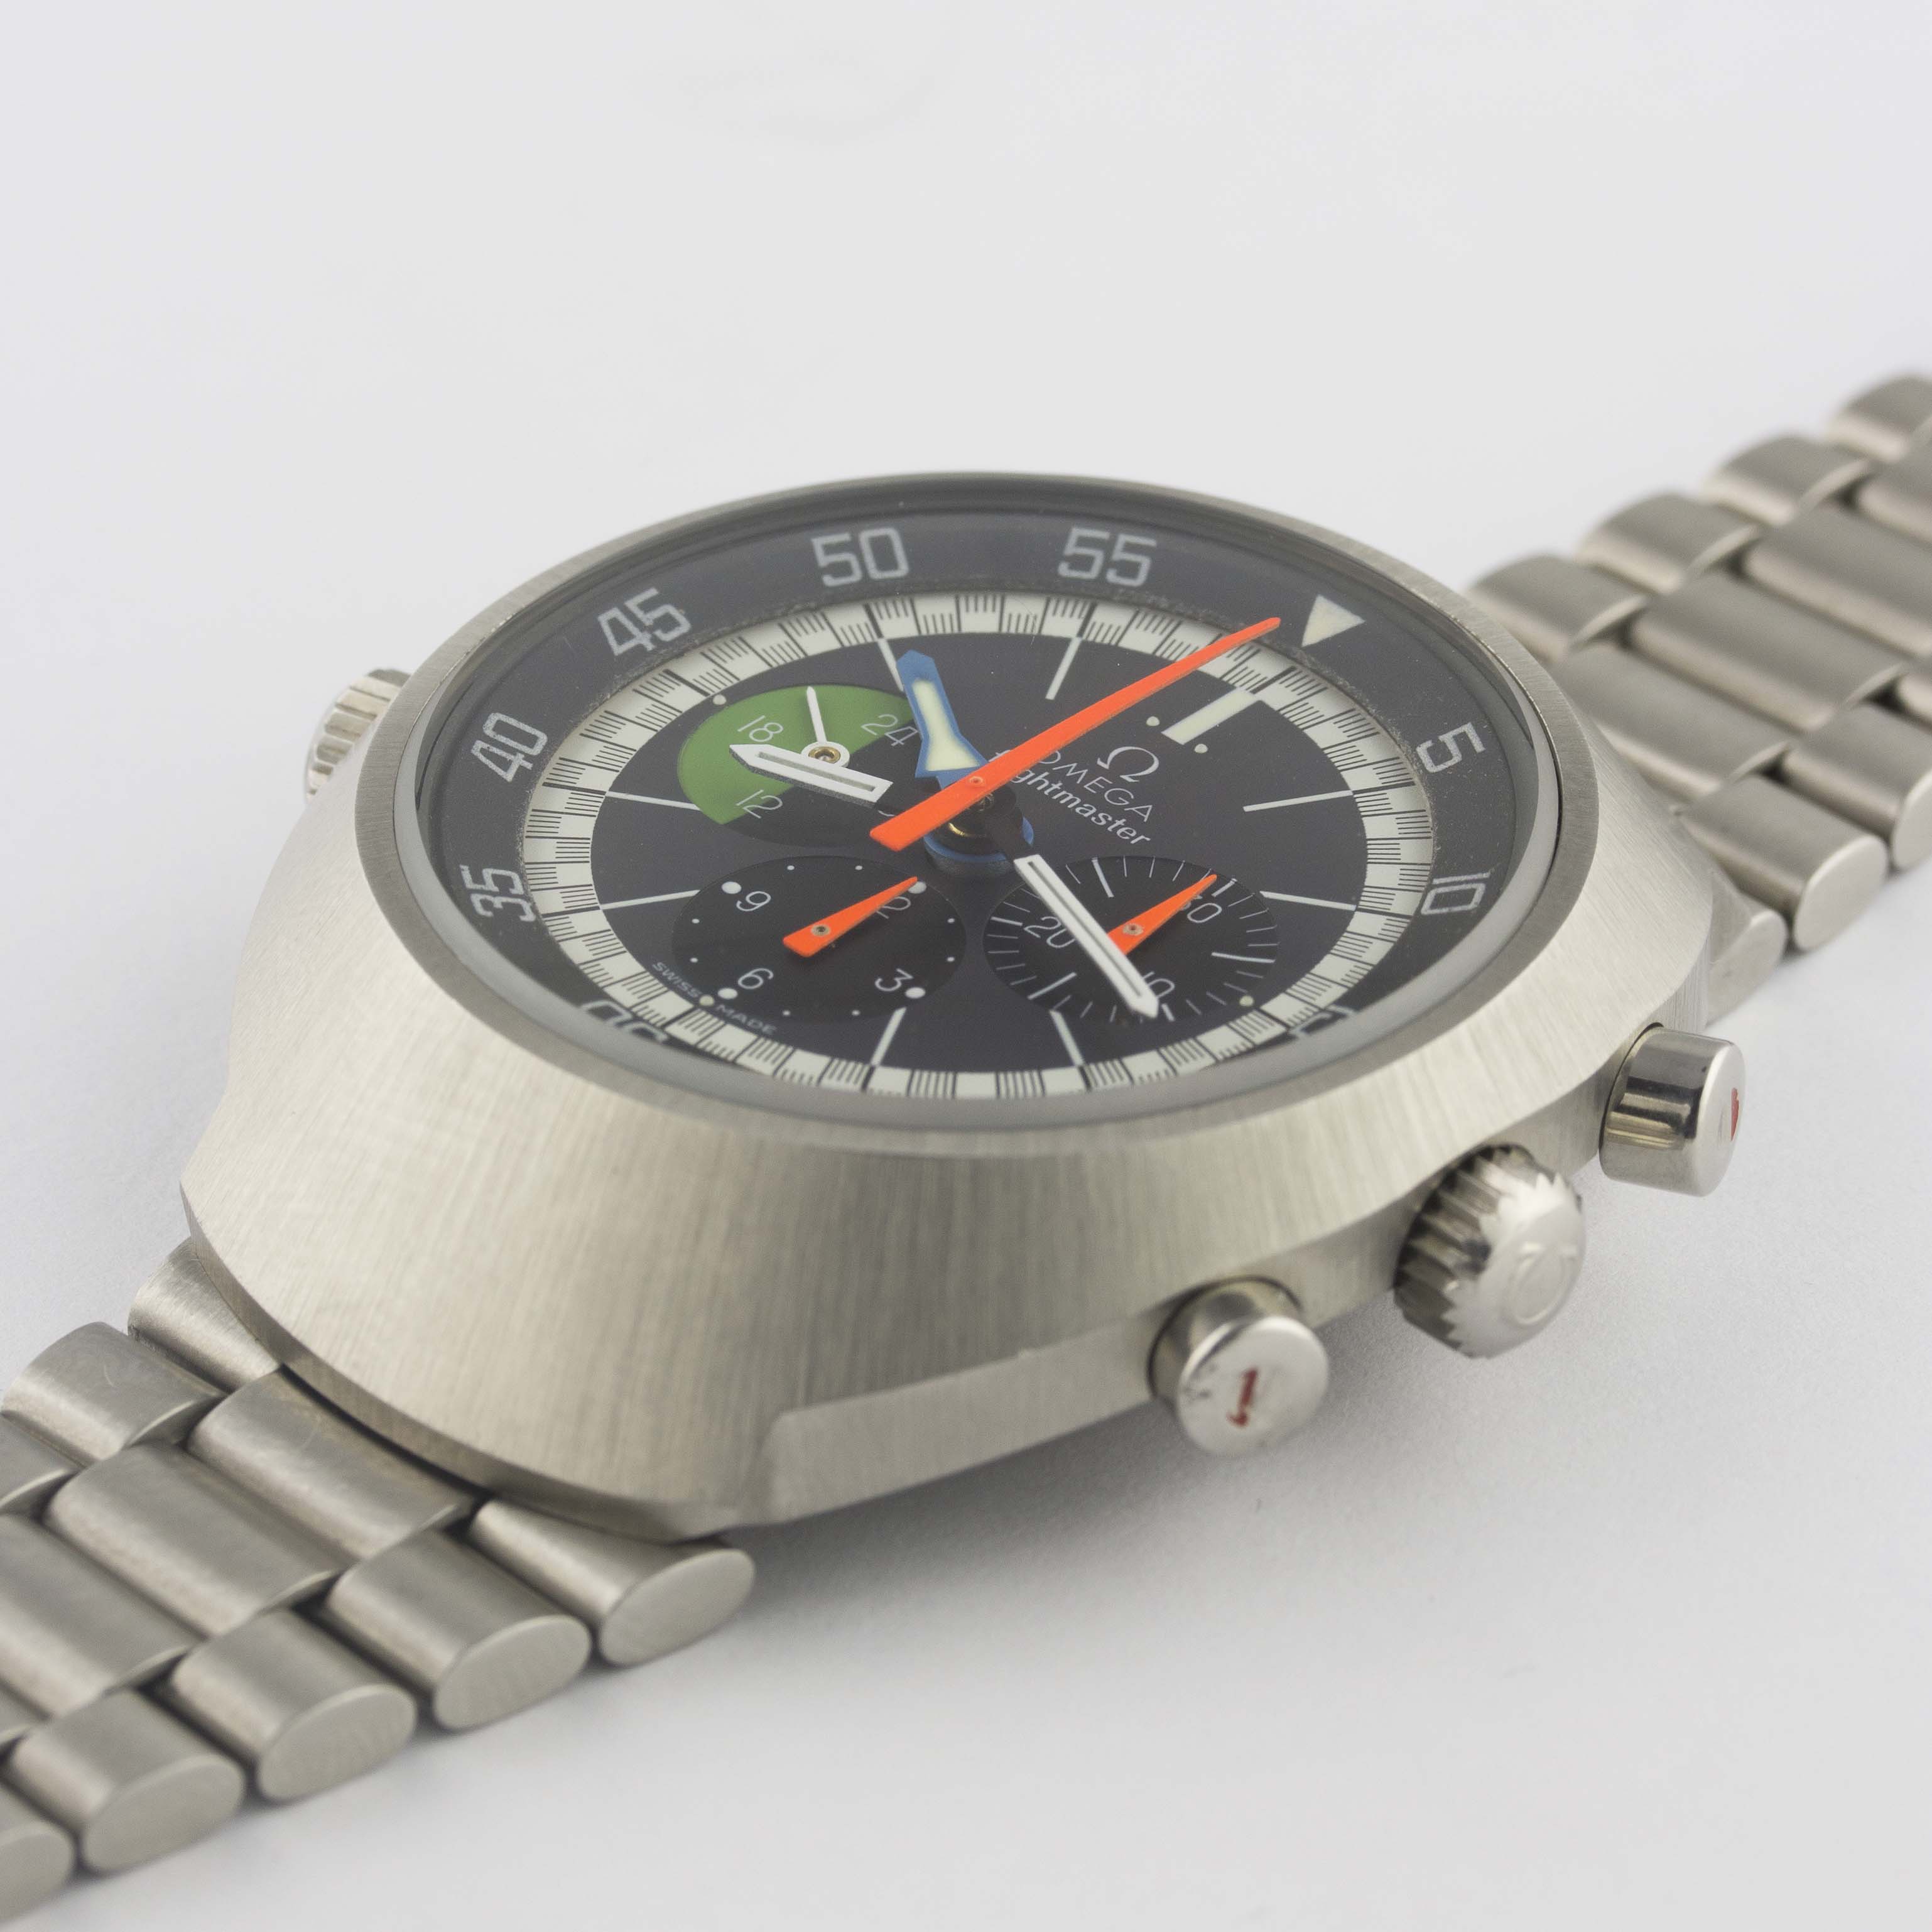 A GENTLEMAN'S STAINLESS STEEL OMEGA FLIGHTMASTER CHRONOGRAPH BRACELET WATCH CIRCA 1972, REF. 145.013 - Image 3 of 11